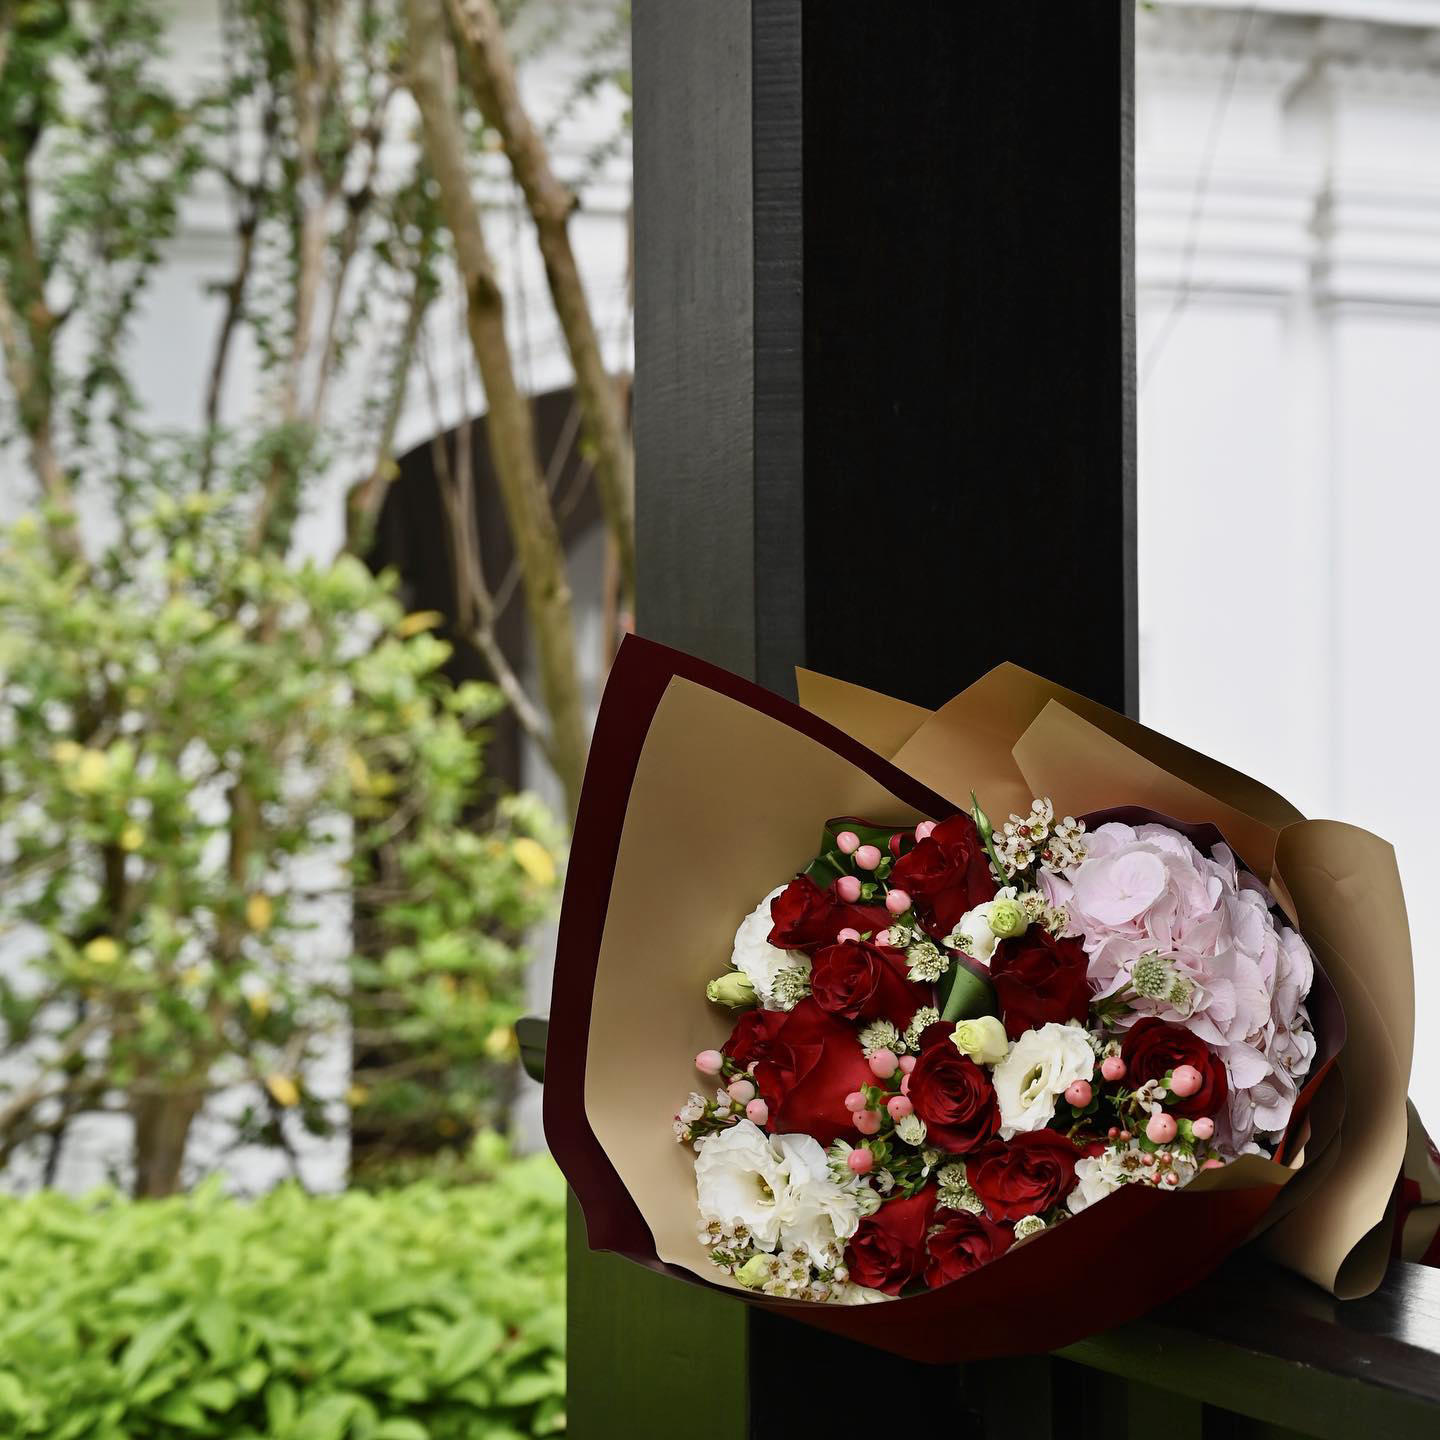 Crowned as the epitome of love and romance, roses are a classic gift idea to dazzle your loved one